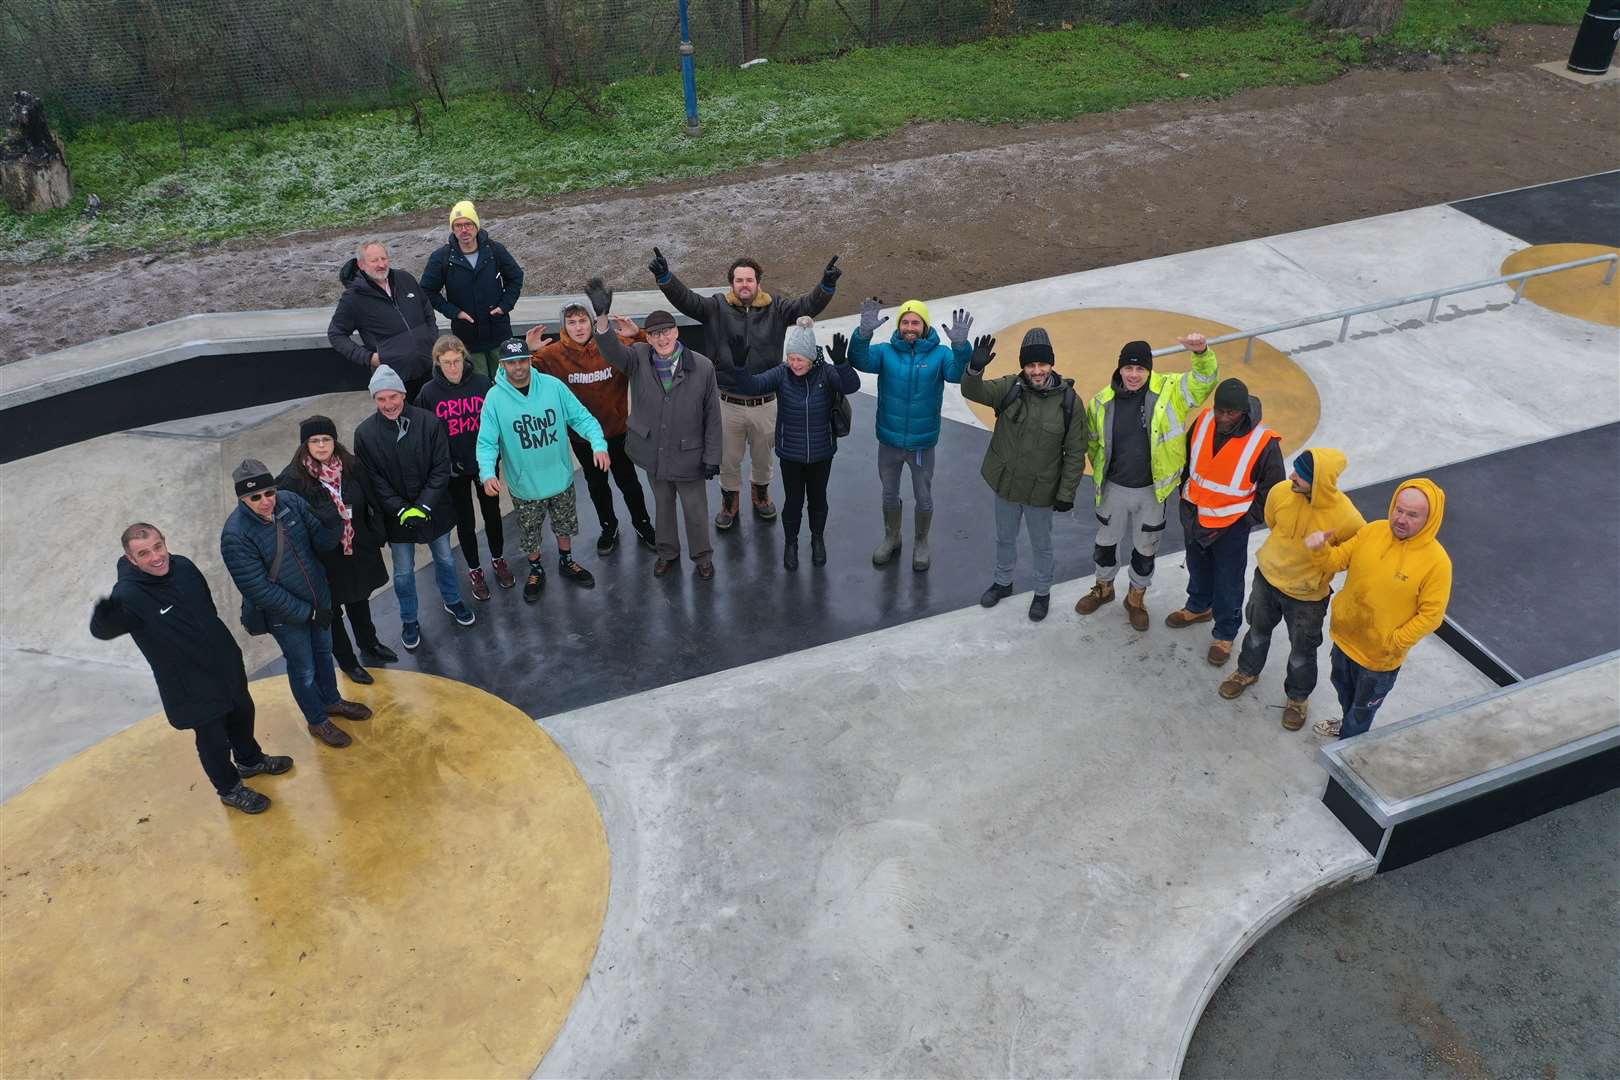 JD O'Brien and others involved in the campaign at the new skate park at St Mary's Recreation Ground. Photo: Maverick Skatepark